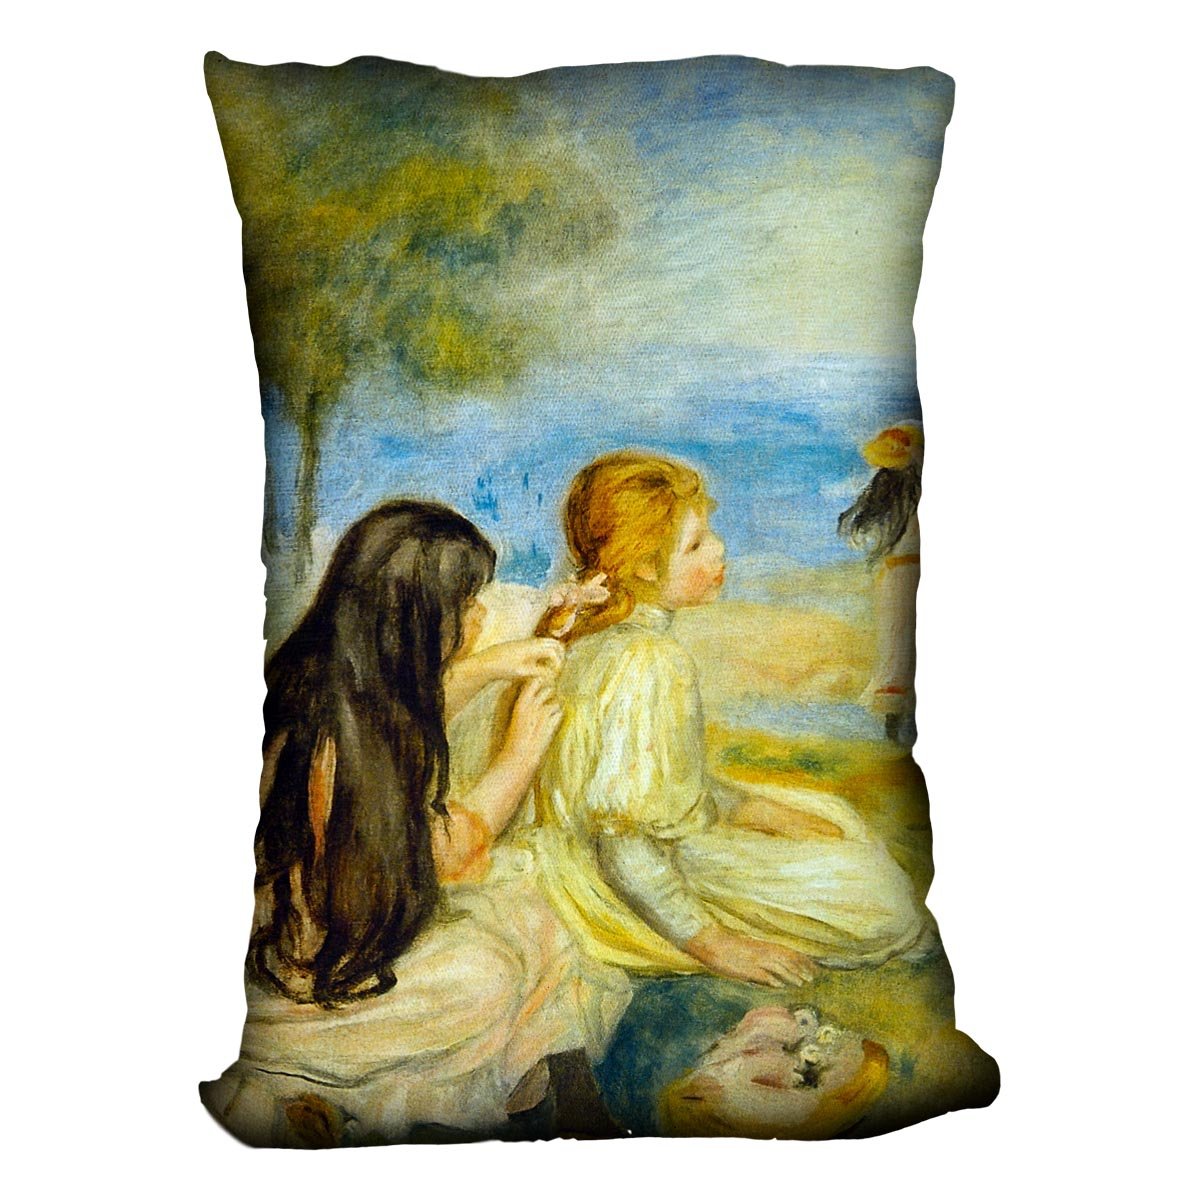 Girls by the Seaside by Renoir Throw Pillow